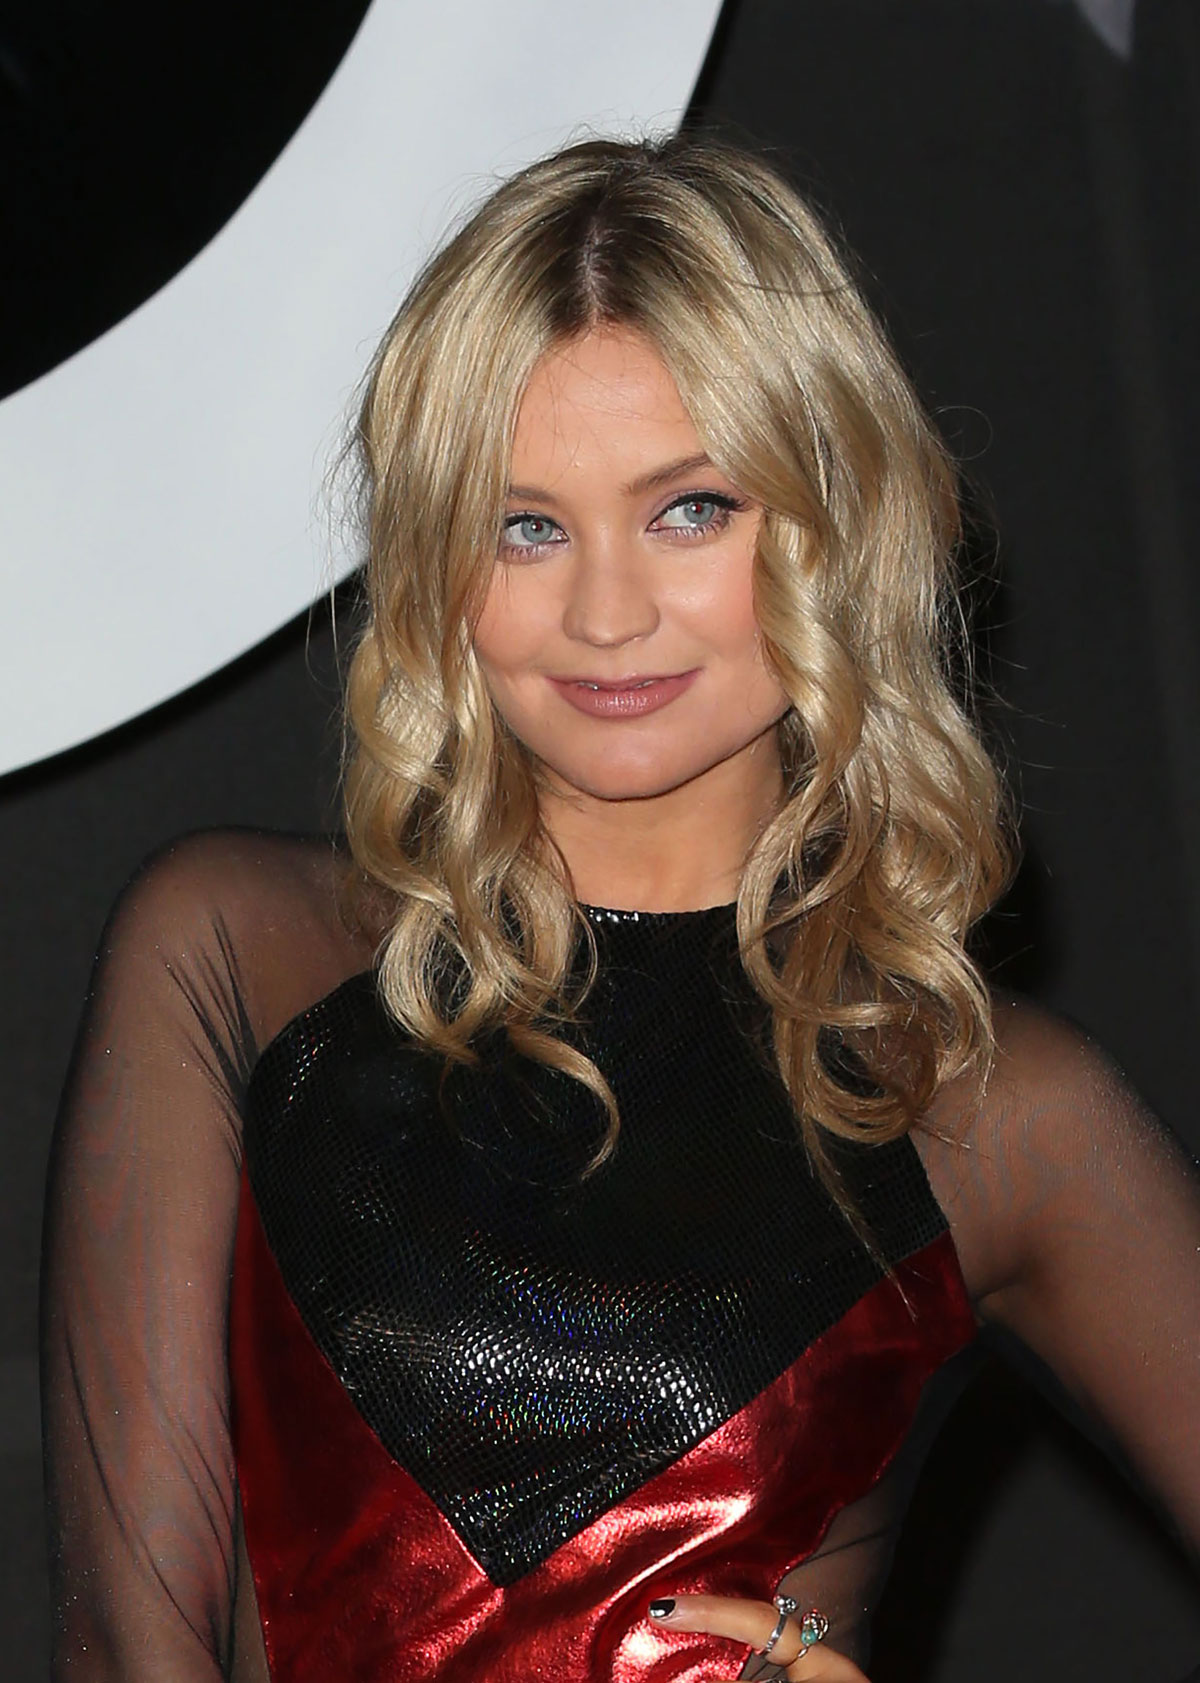 Laura Whitmore attends The BRIT Awards 2014